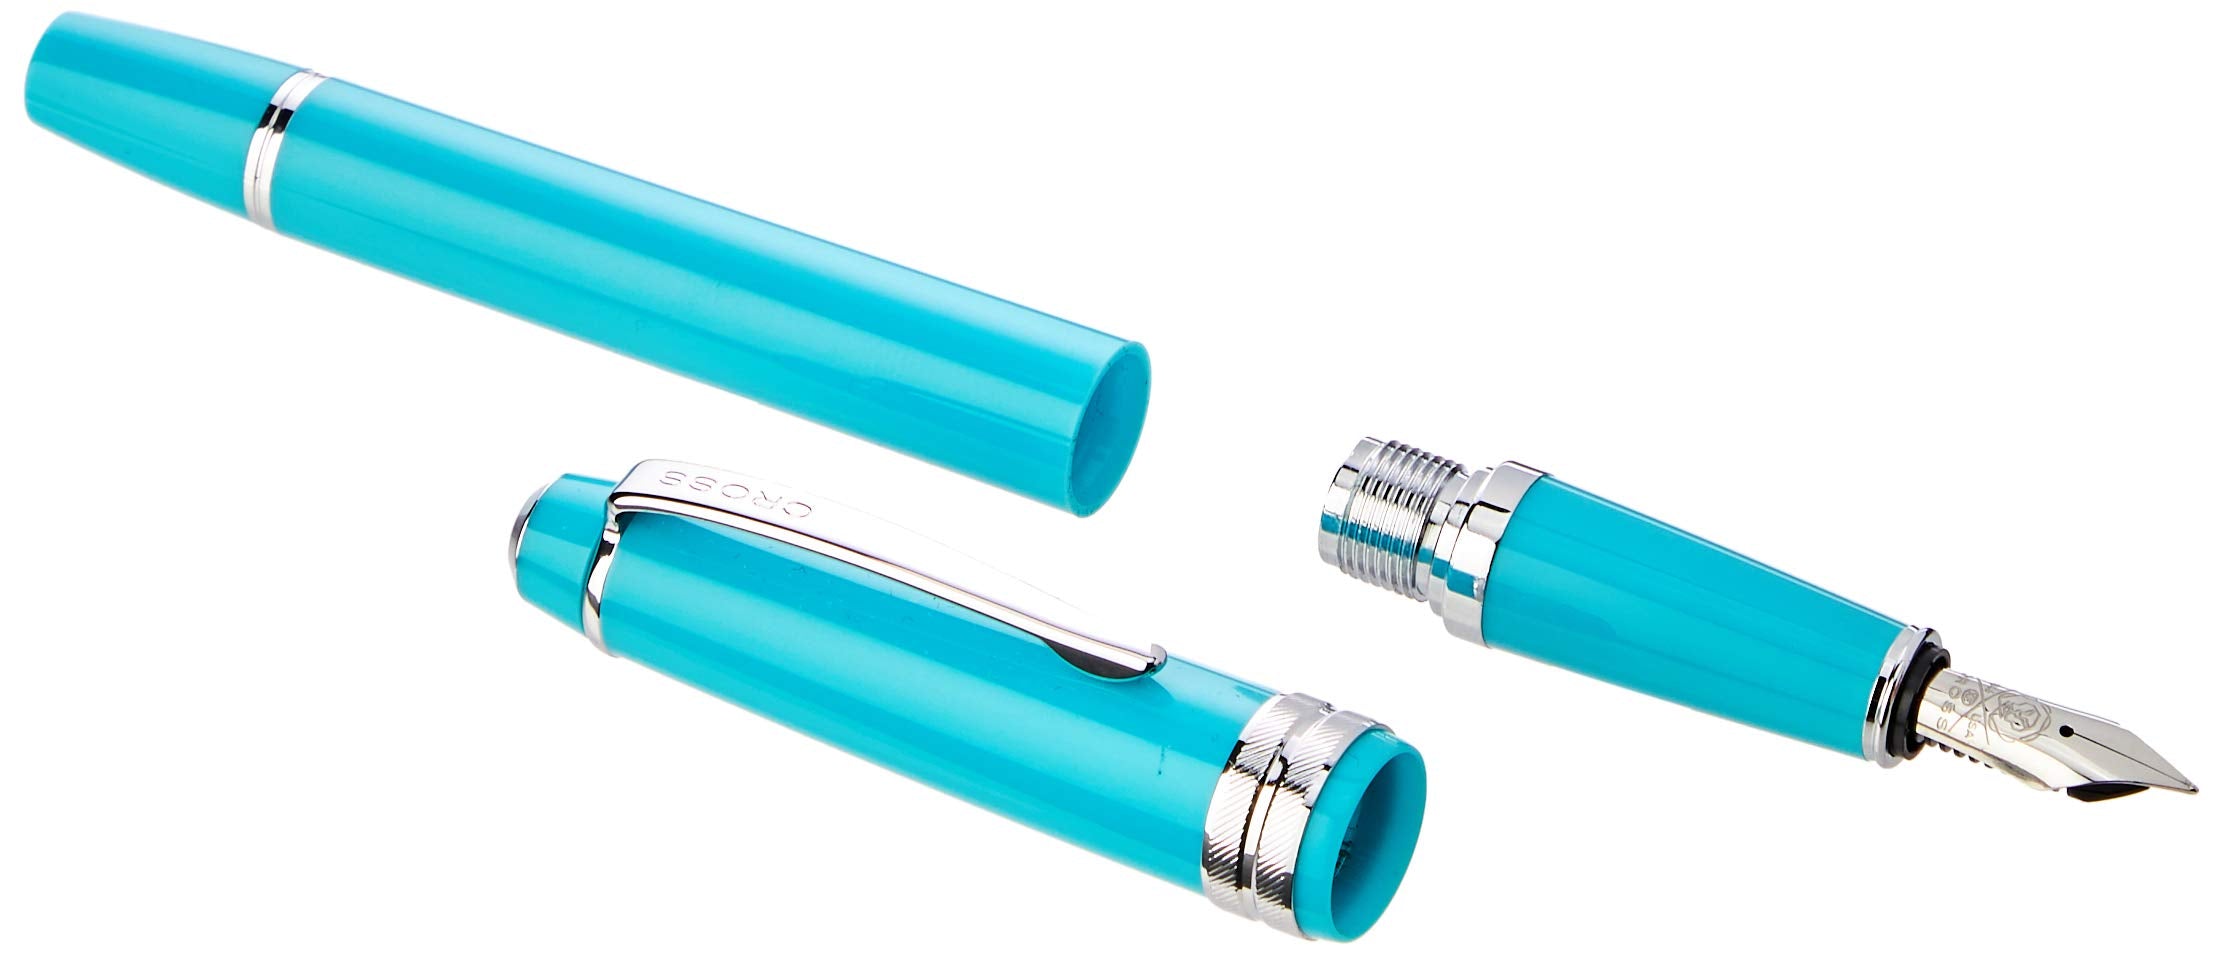 CROSS Bailey Light Polished Resin Refillable Fountain Pen, Extra-Fine Nib, Includes Premium Gift Box - Teal  - Like New